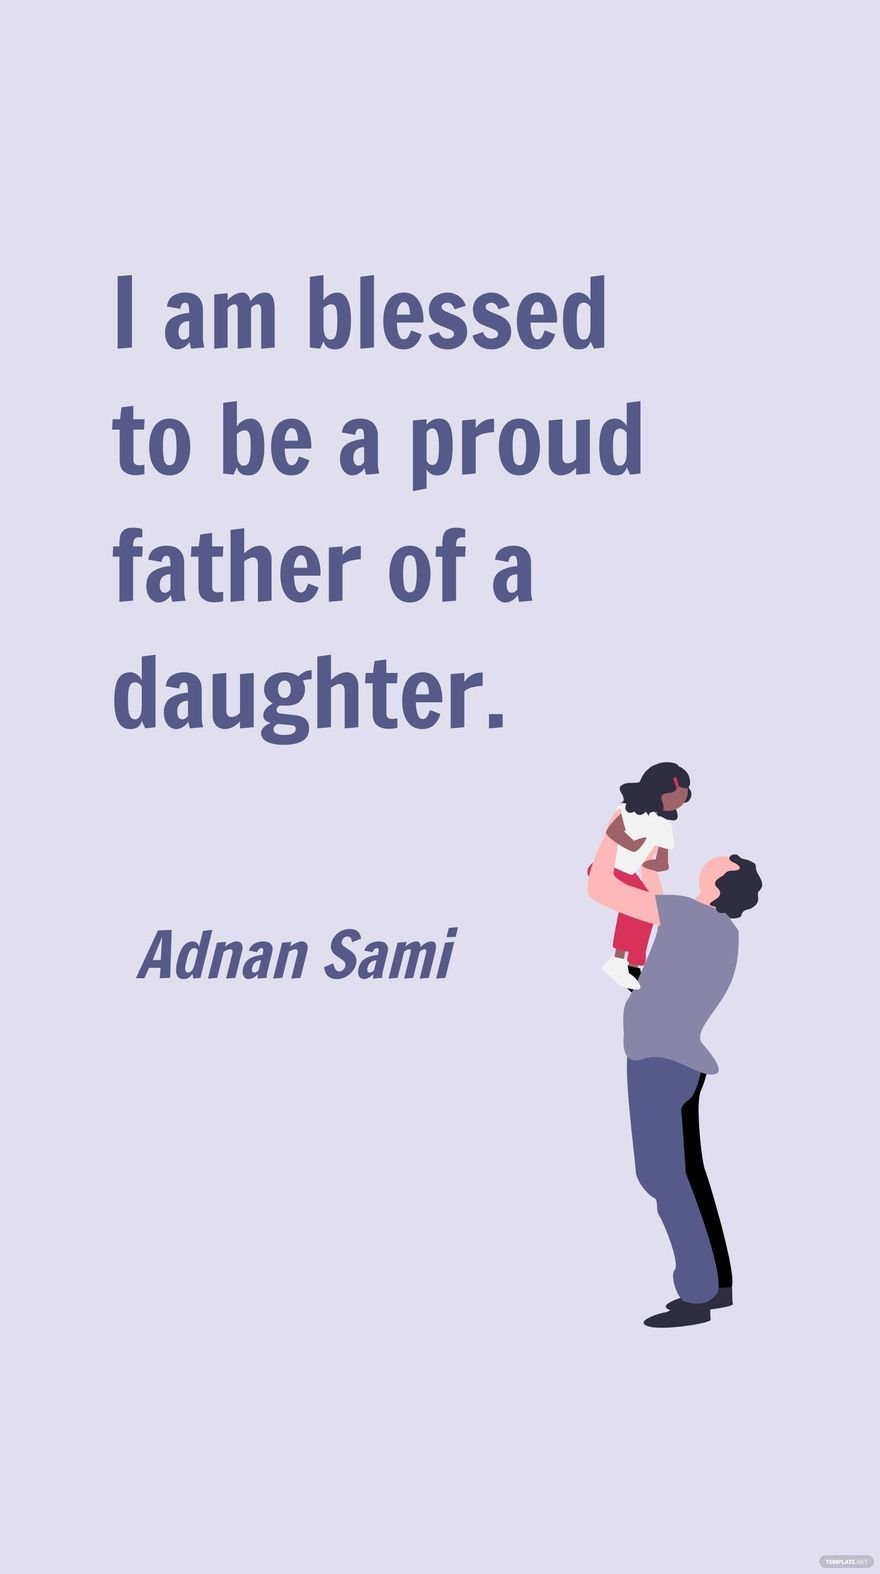 Free Adnan Sami - I am blessed to be a proud father of a daughter. in JPG